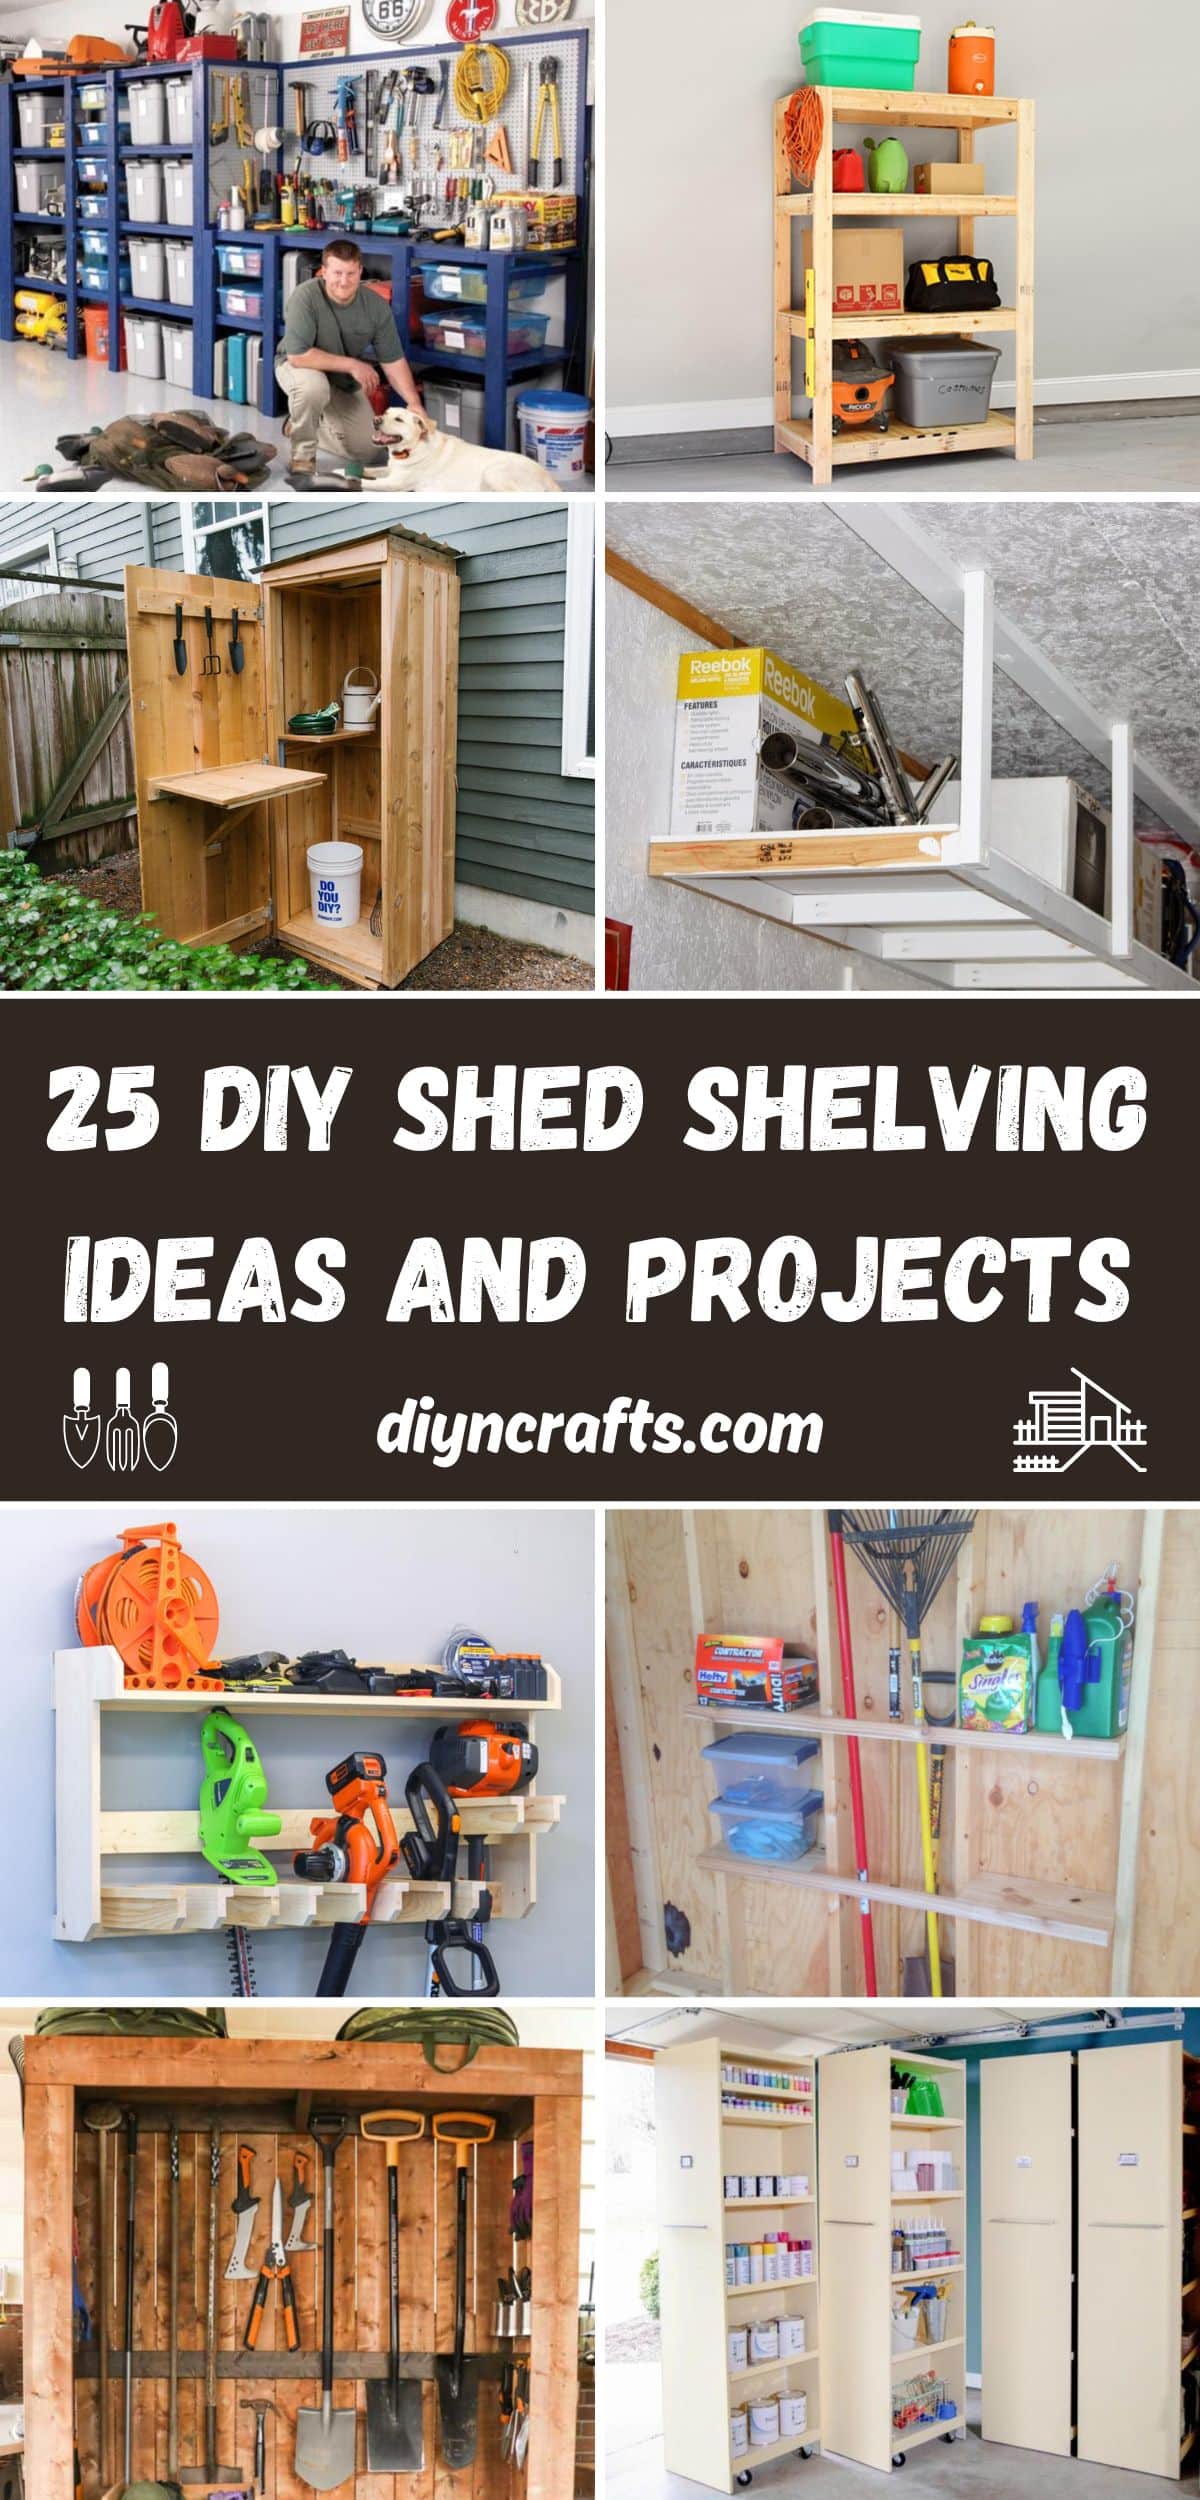 25 DIY Shed Shelving Ideas and Projects collage.